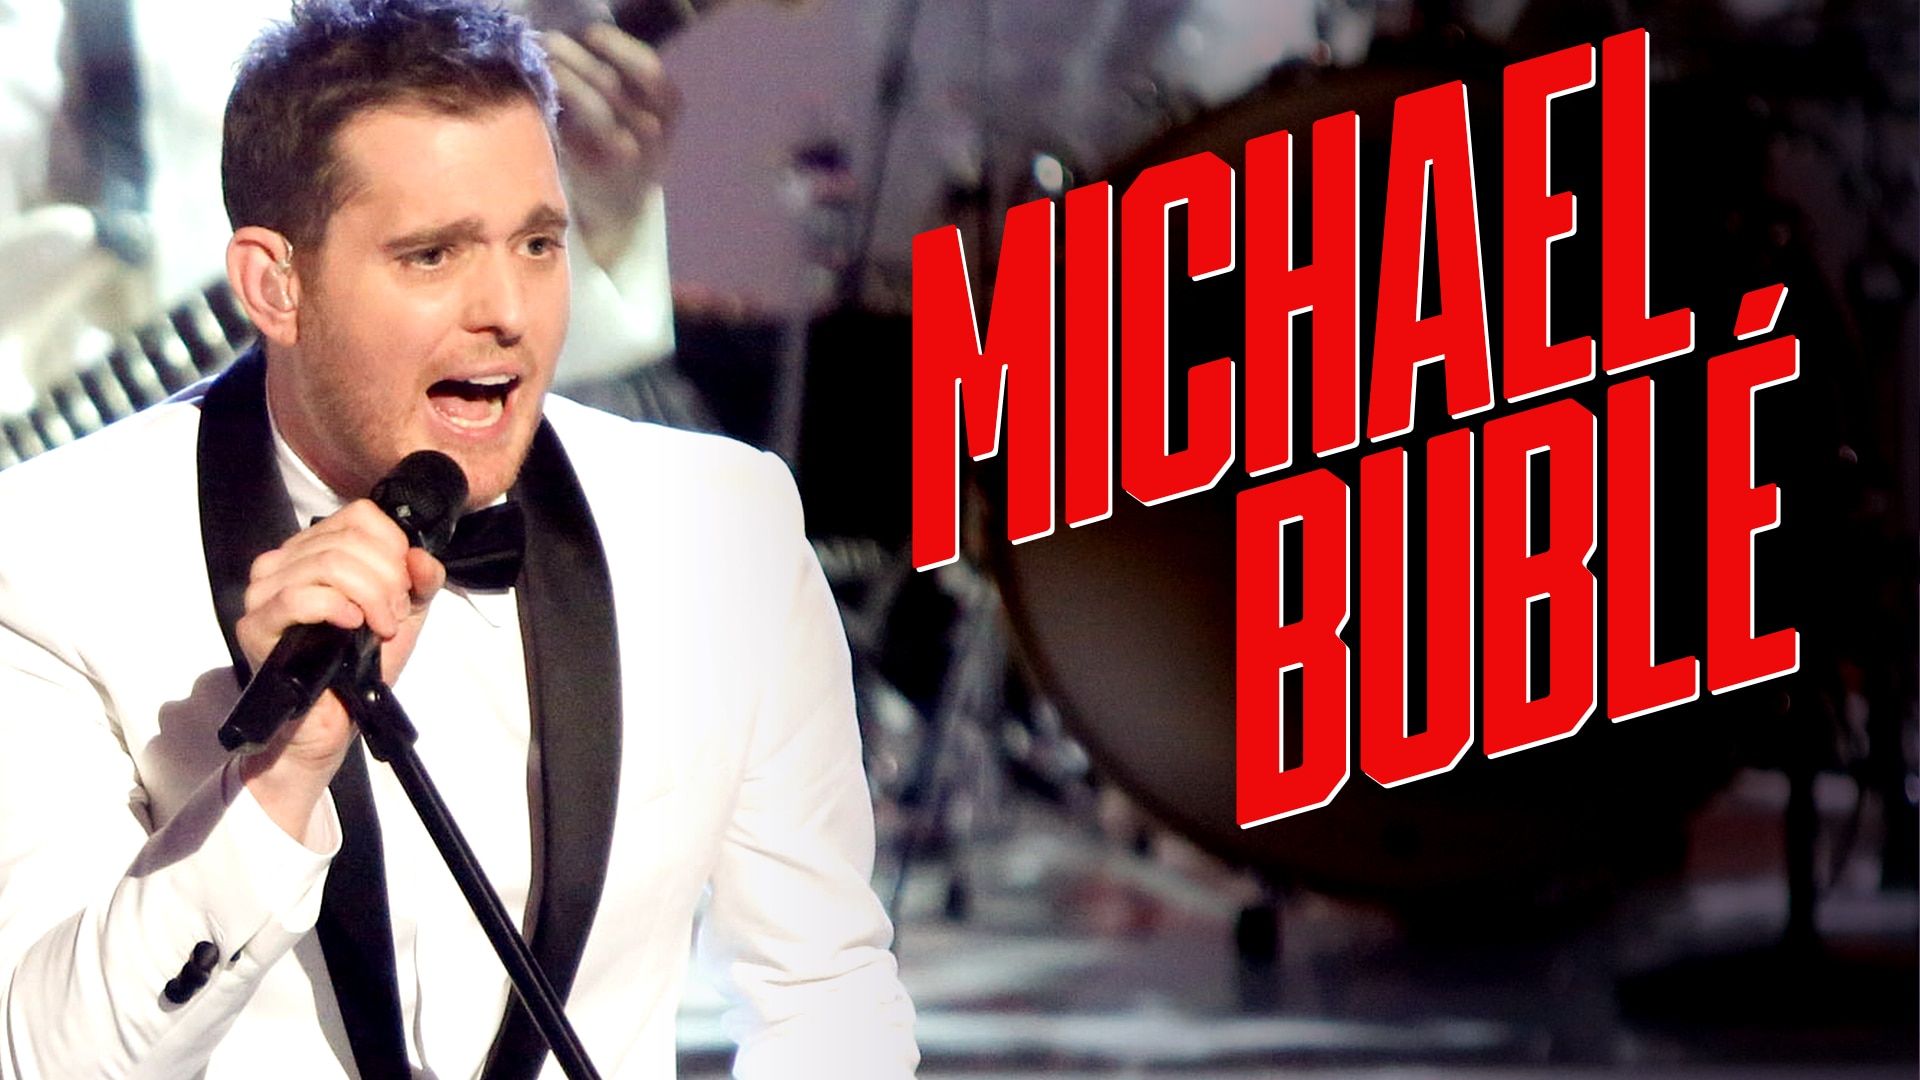 Watch The Voice Highlight: Four Time Grammy Winner Michael Bublé Performs Christmas (Baby Please Come Home) Voice 2020